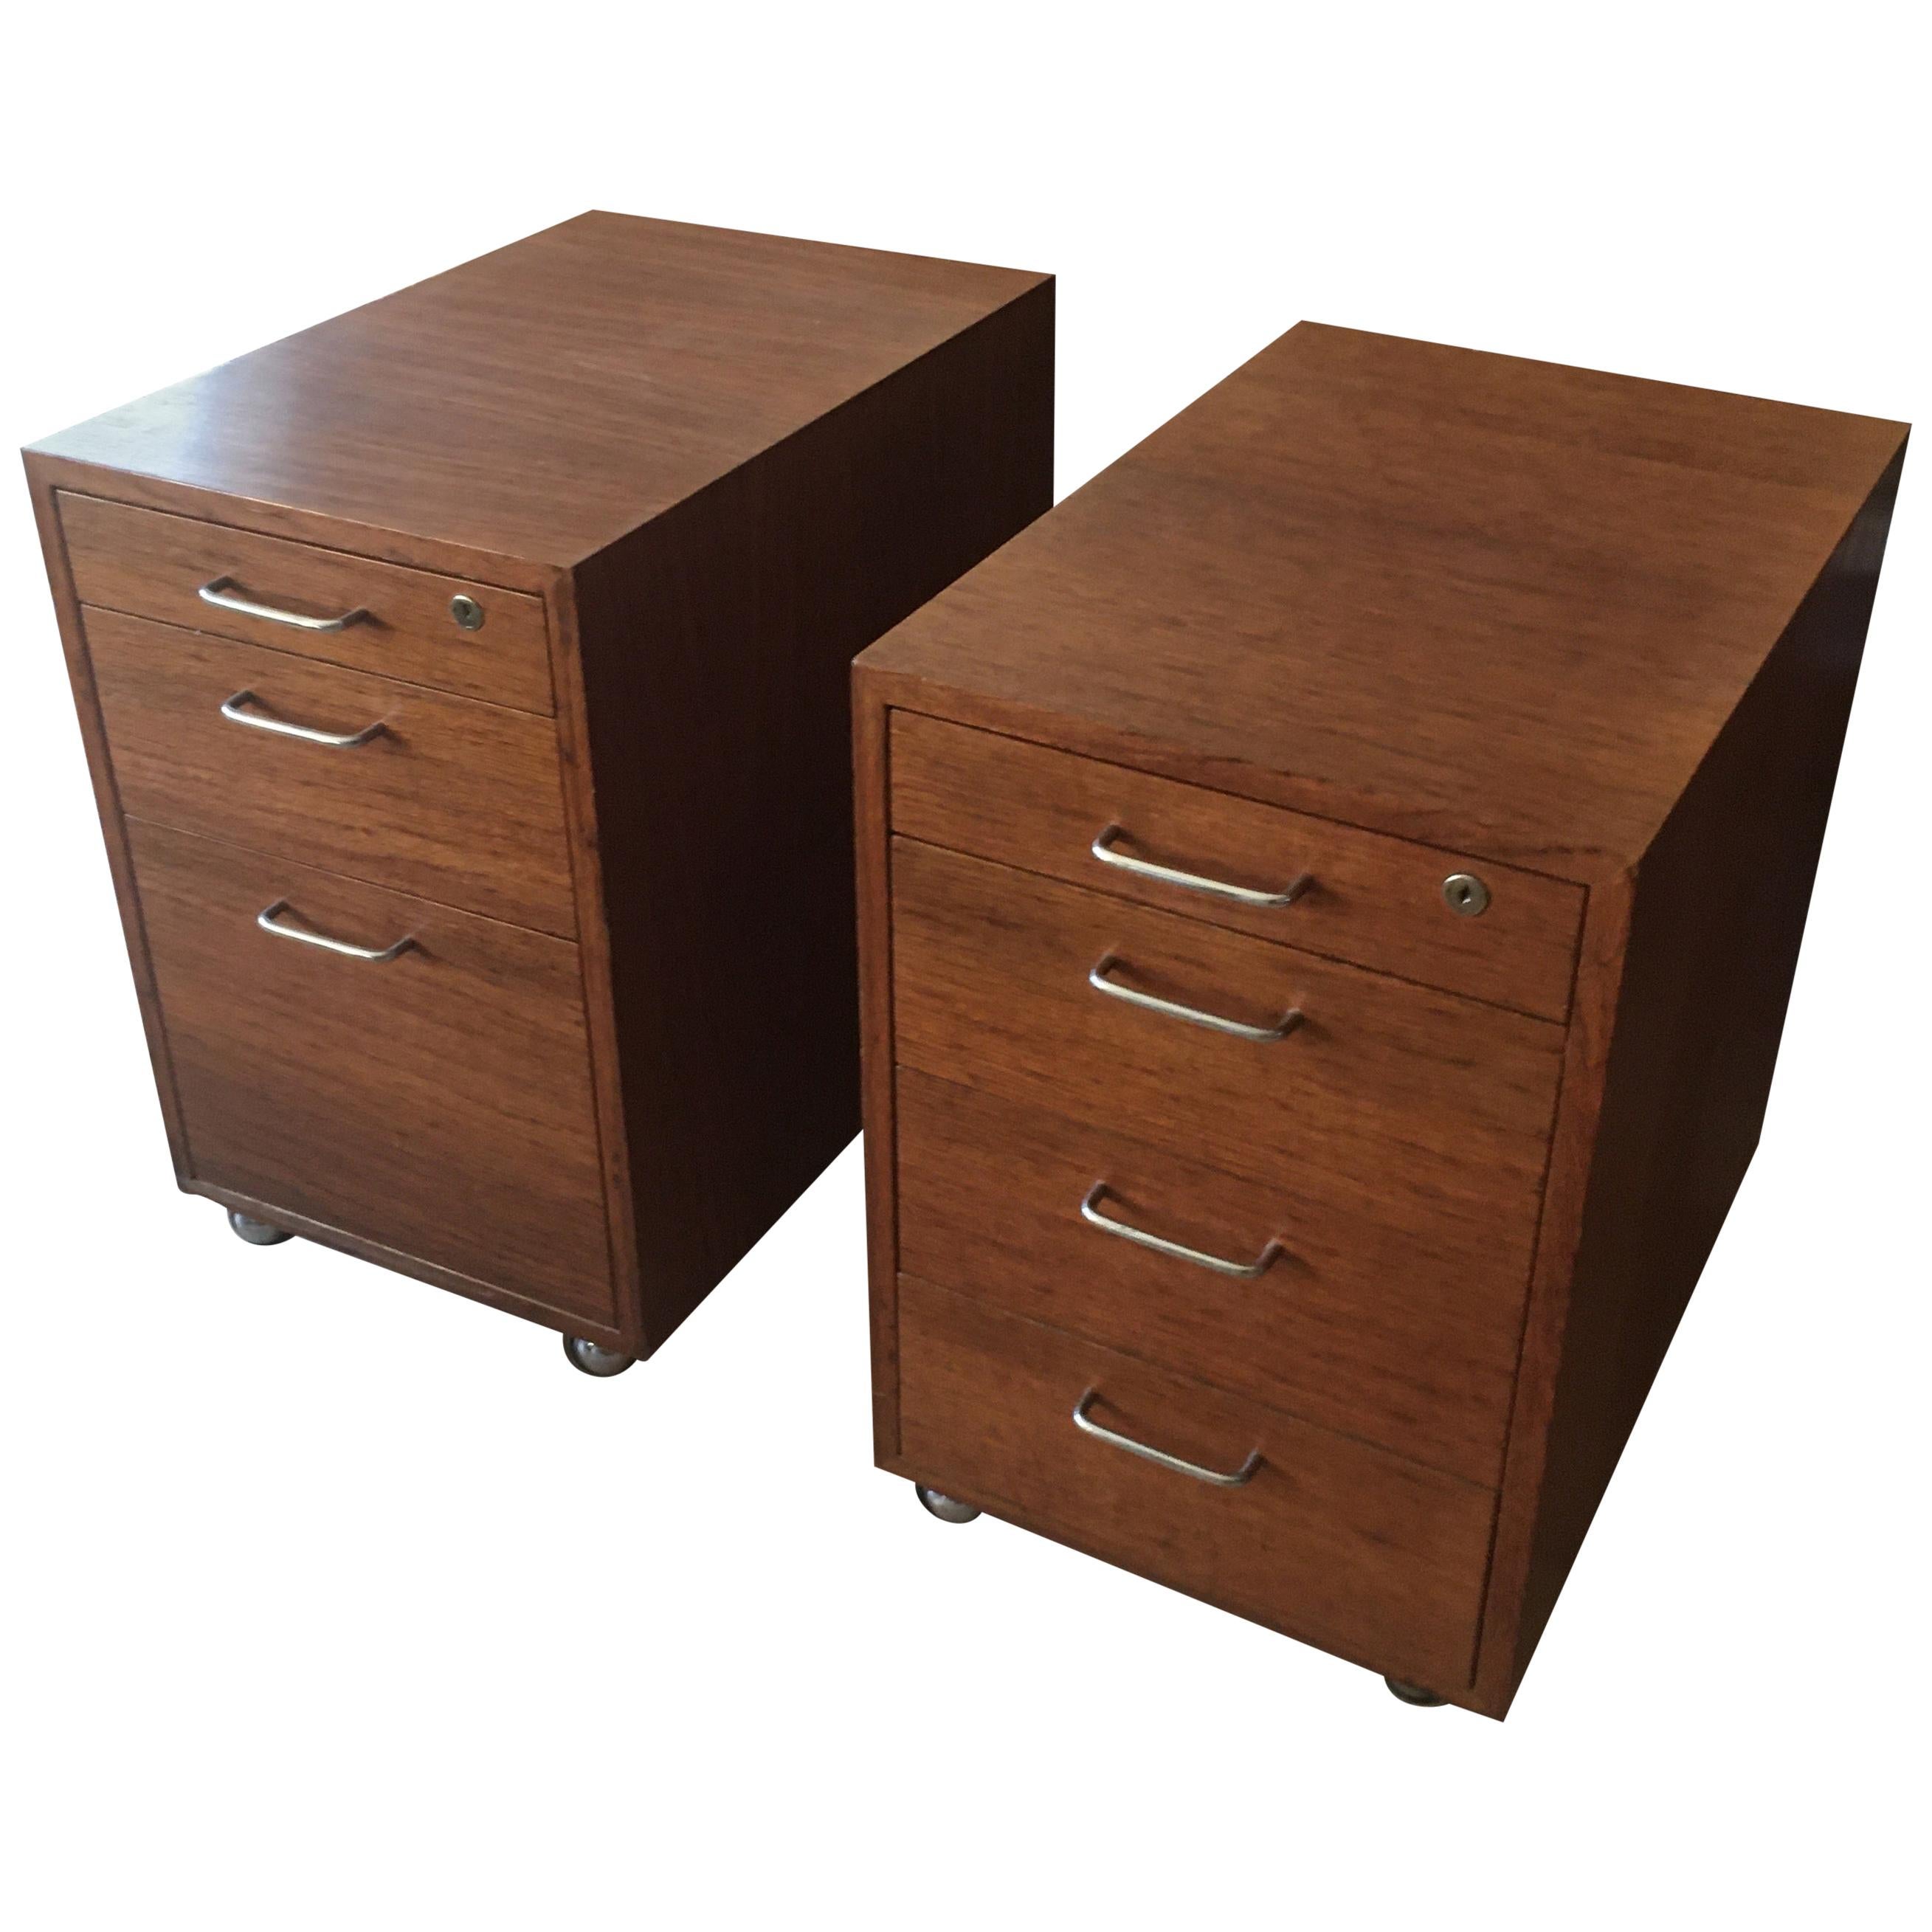 Midcentury Teak Drei-Schublade File Cabinets On Casters:: Great Bed Side Tables